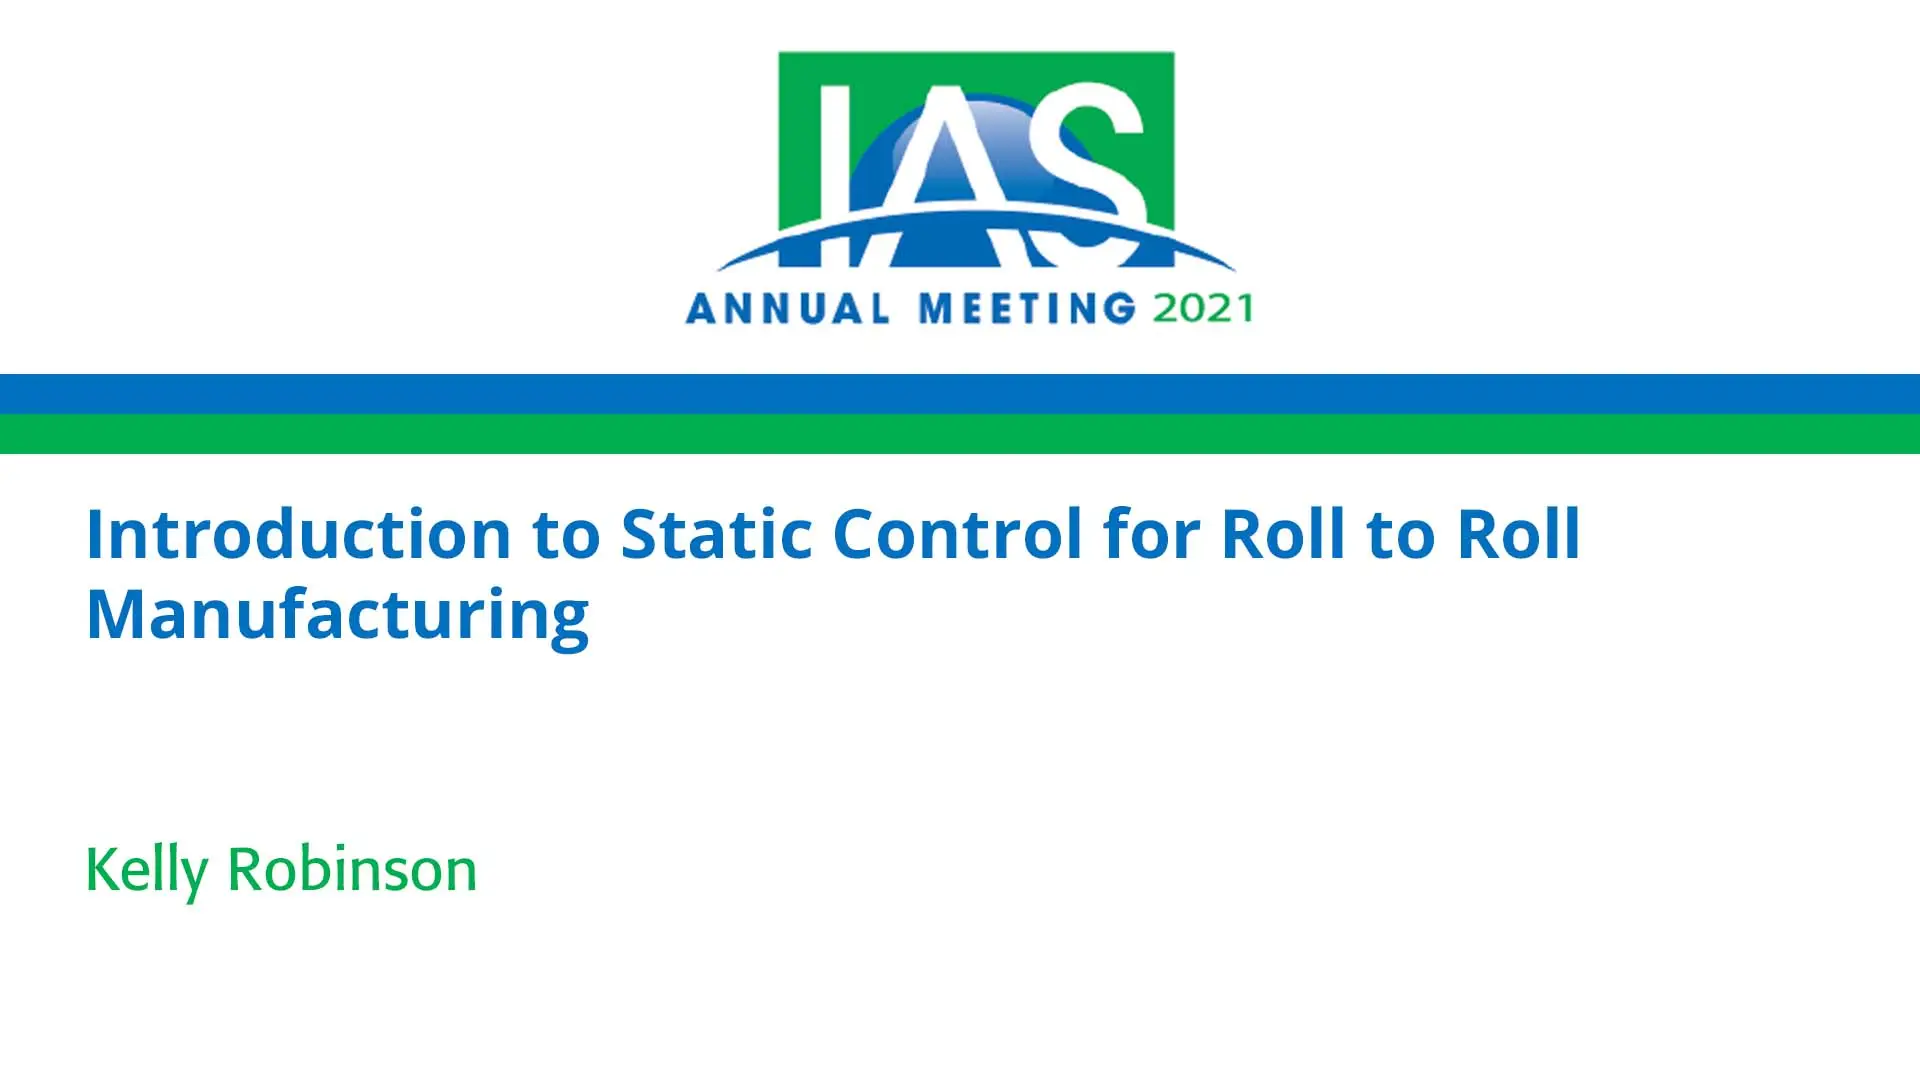 Introduction to Static Control for Roll to Roll Manufacturing